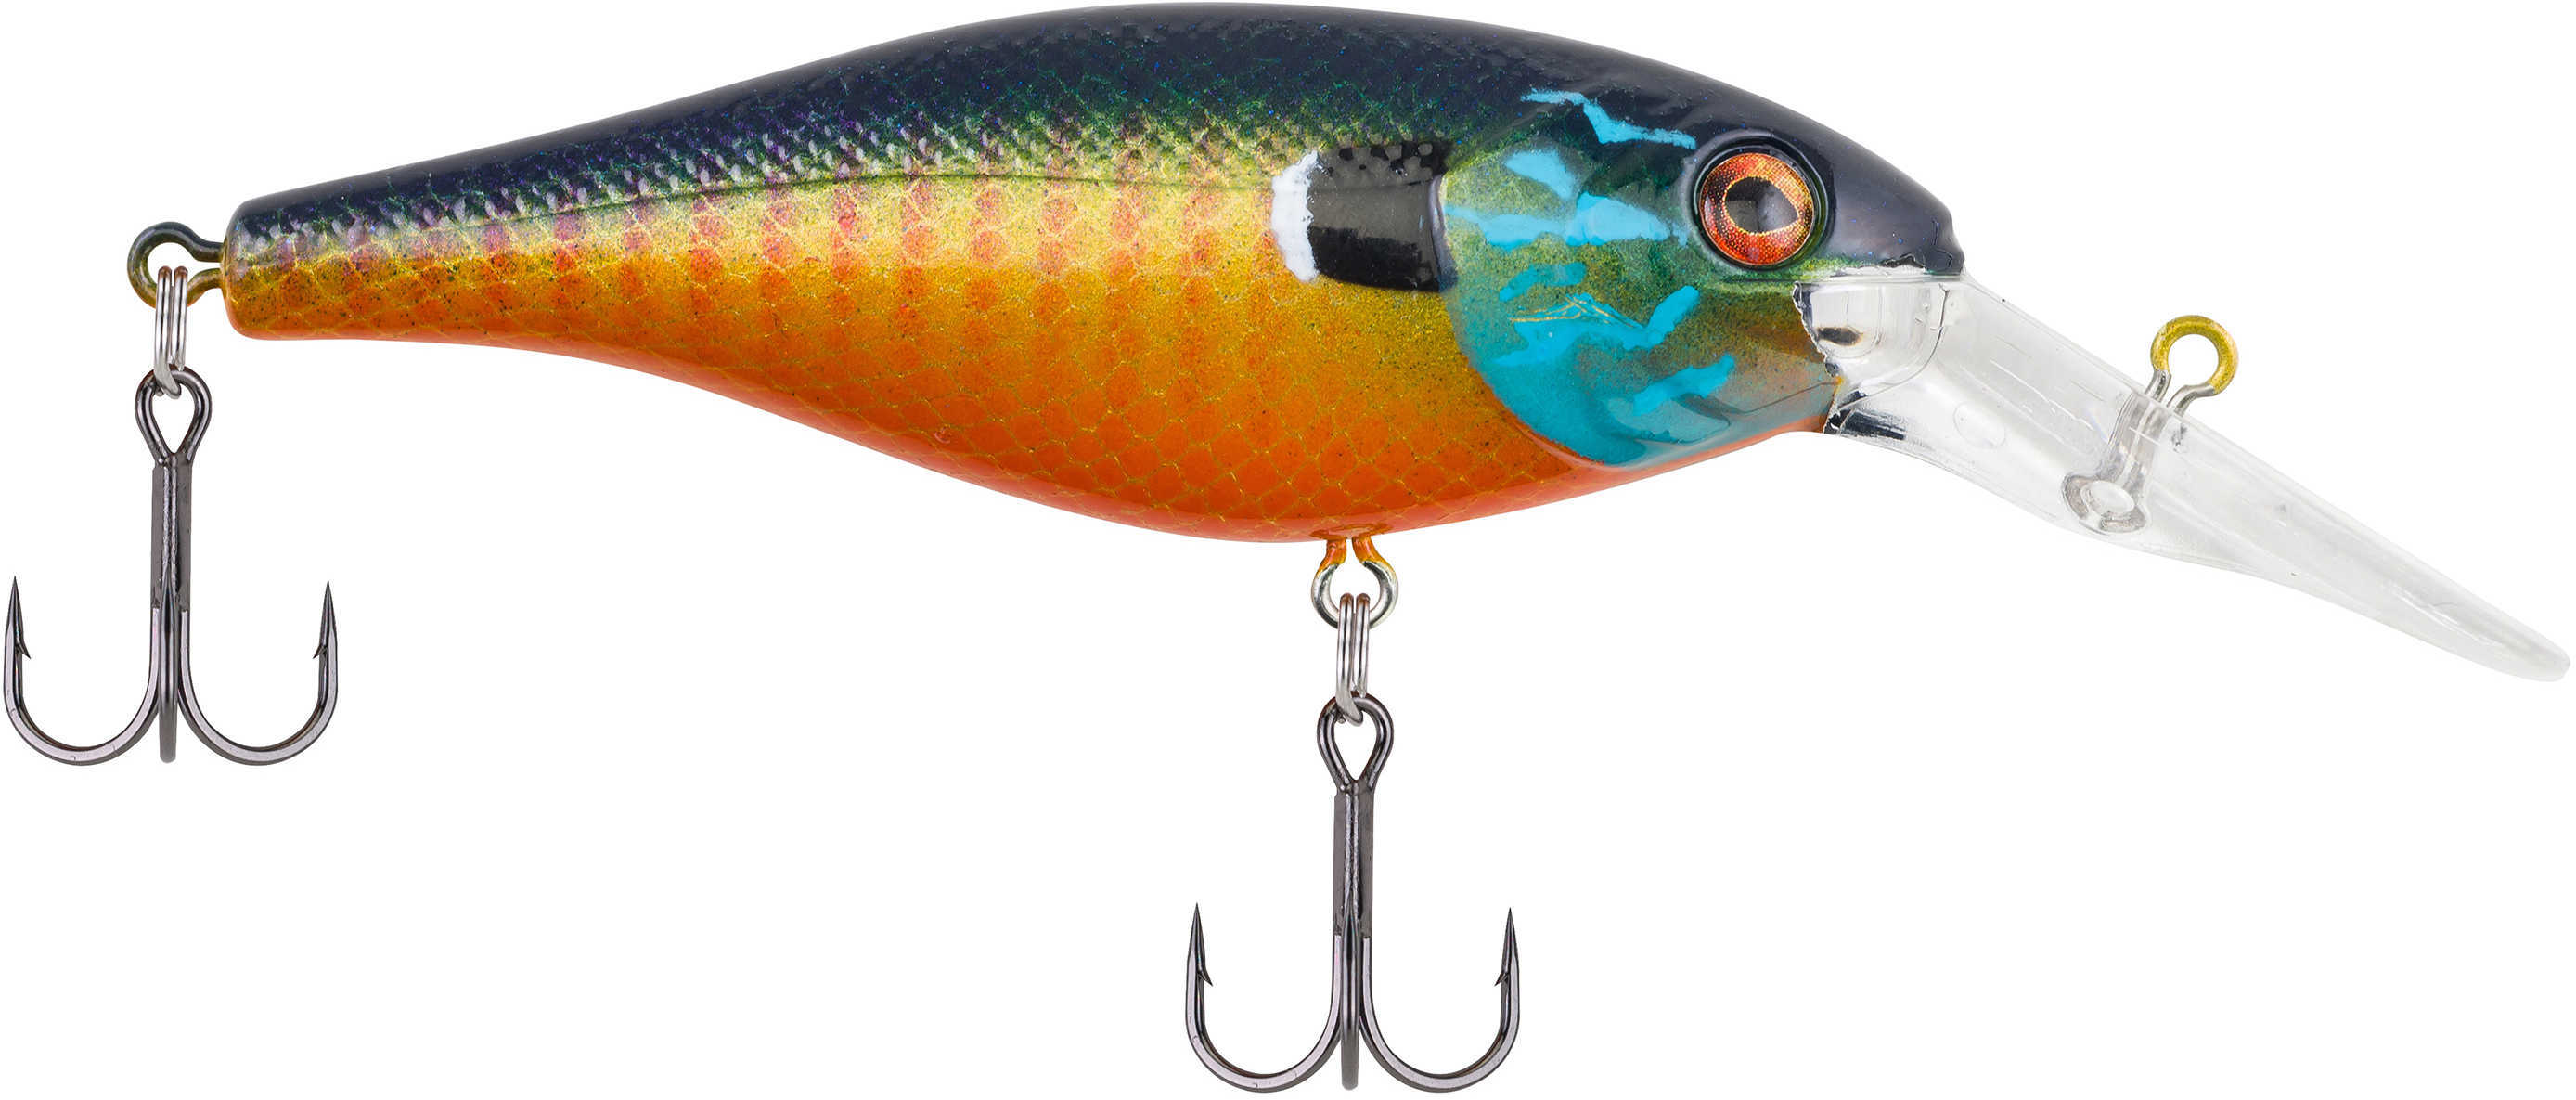 Berkley Bad Shad, 2 3/4" Length Gilly, Pack Of 1